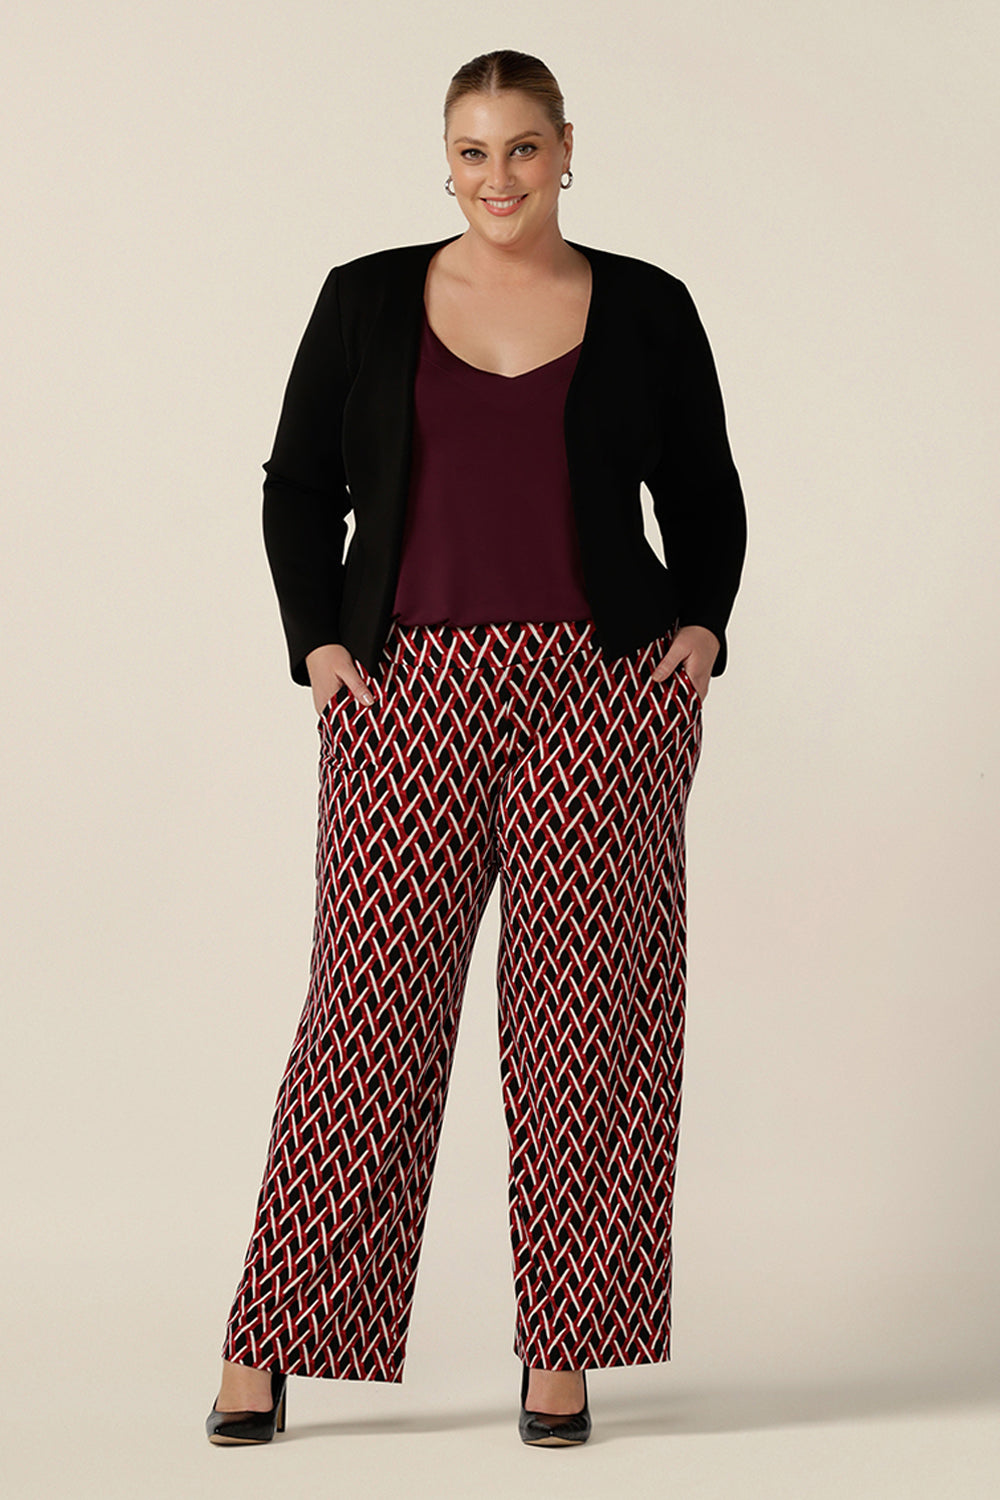 Good pants for plus size women, these geometric print pants are straight cut , wide leg trousers with a wide, pull-on waistband. Styled for work wear, these office pants are worn with a plum cami top and workwear jacket in black. Made in Australia, shop online now in sizes 8 to 24.